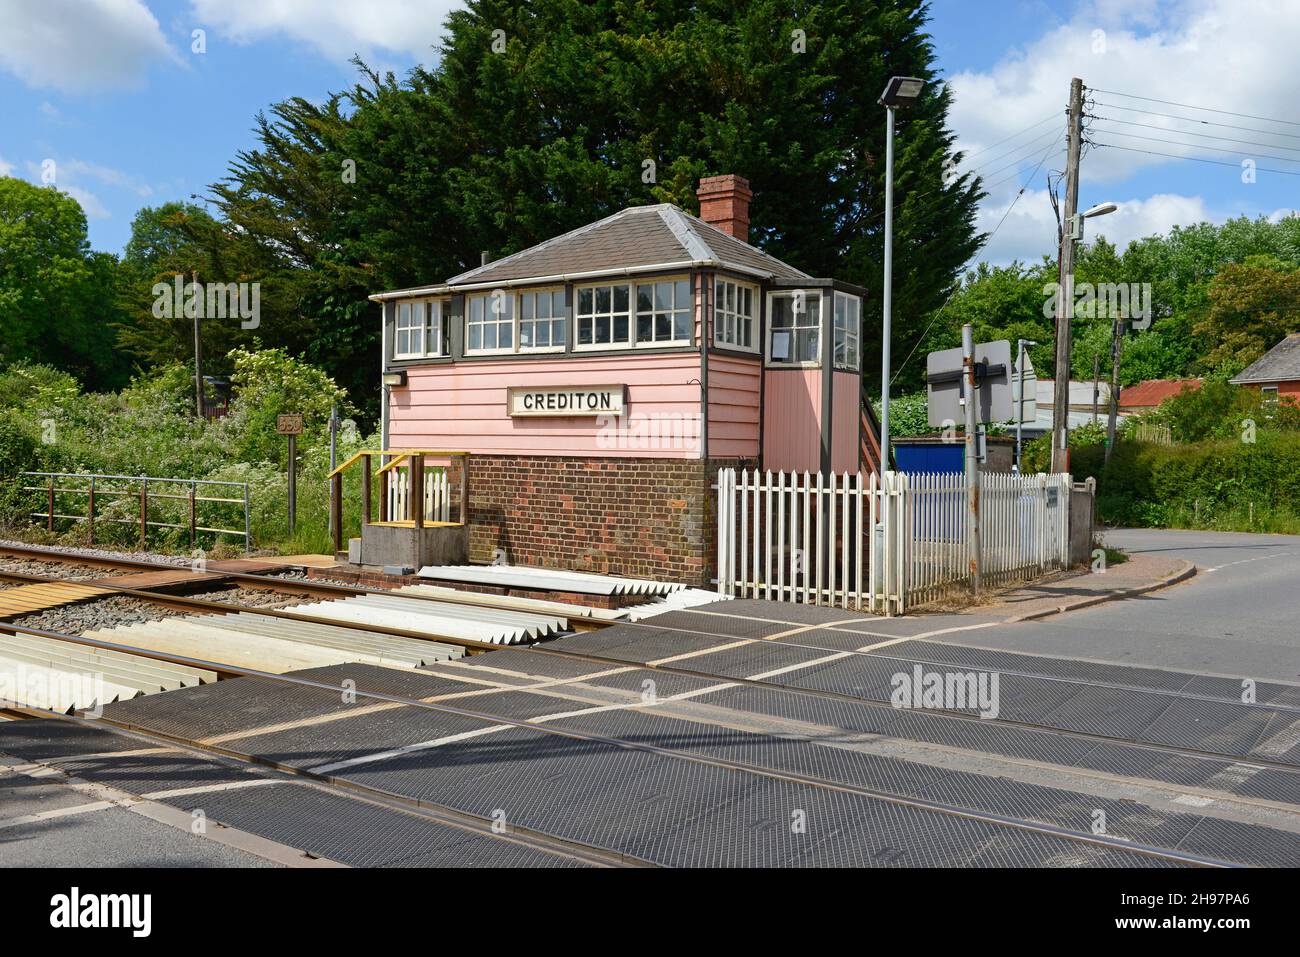 The signalbox at Crediton in Devon was built during the Victorian era and is still in use today. The pink colour is that of the old LSWR rail company. Stock Photo